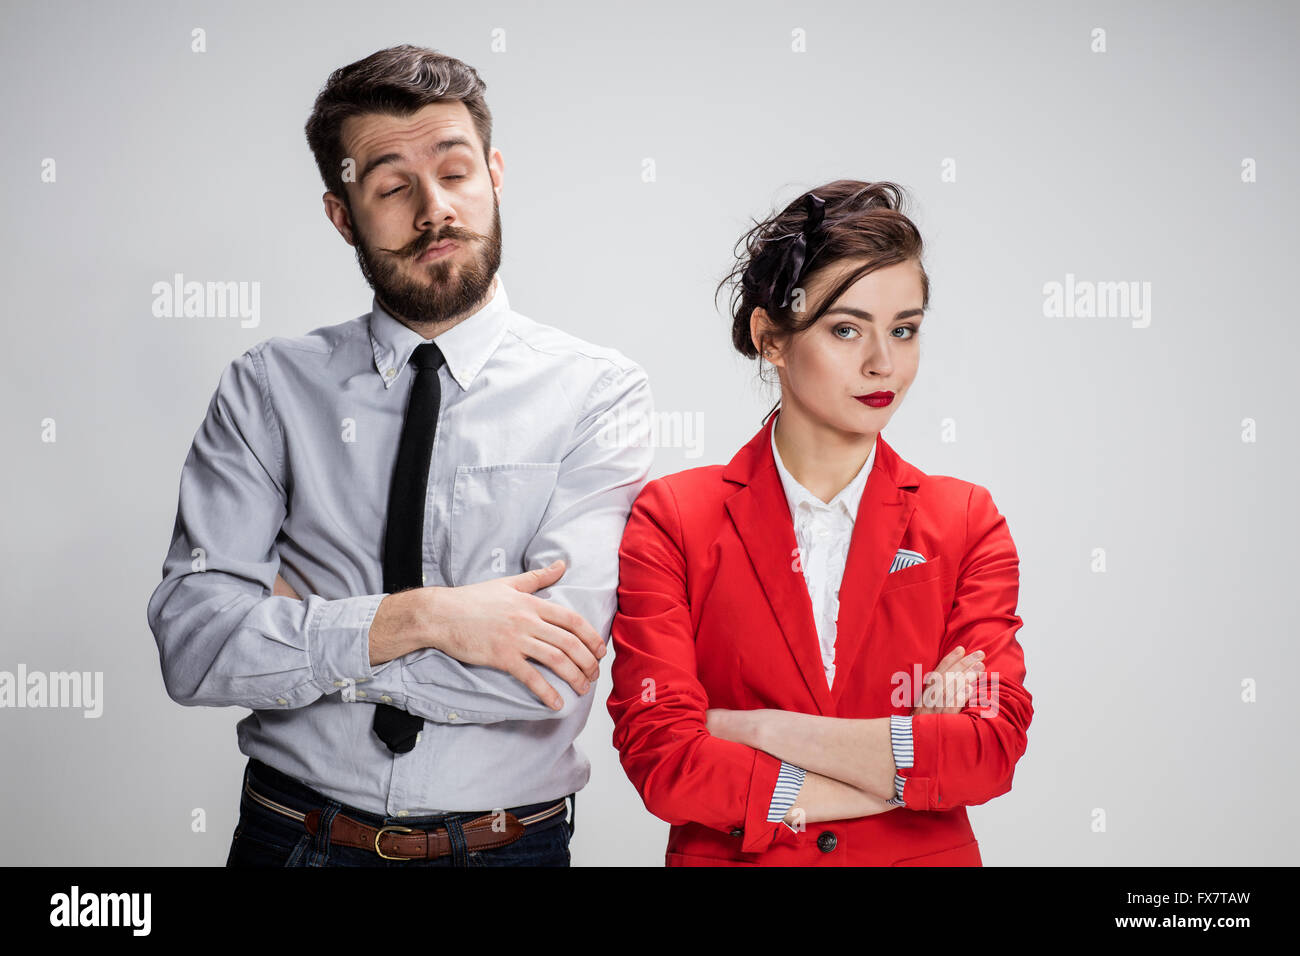 The funny sad business man and woman conflicting on a gray background. Business concept  of relationship of colleagues Stock Photo